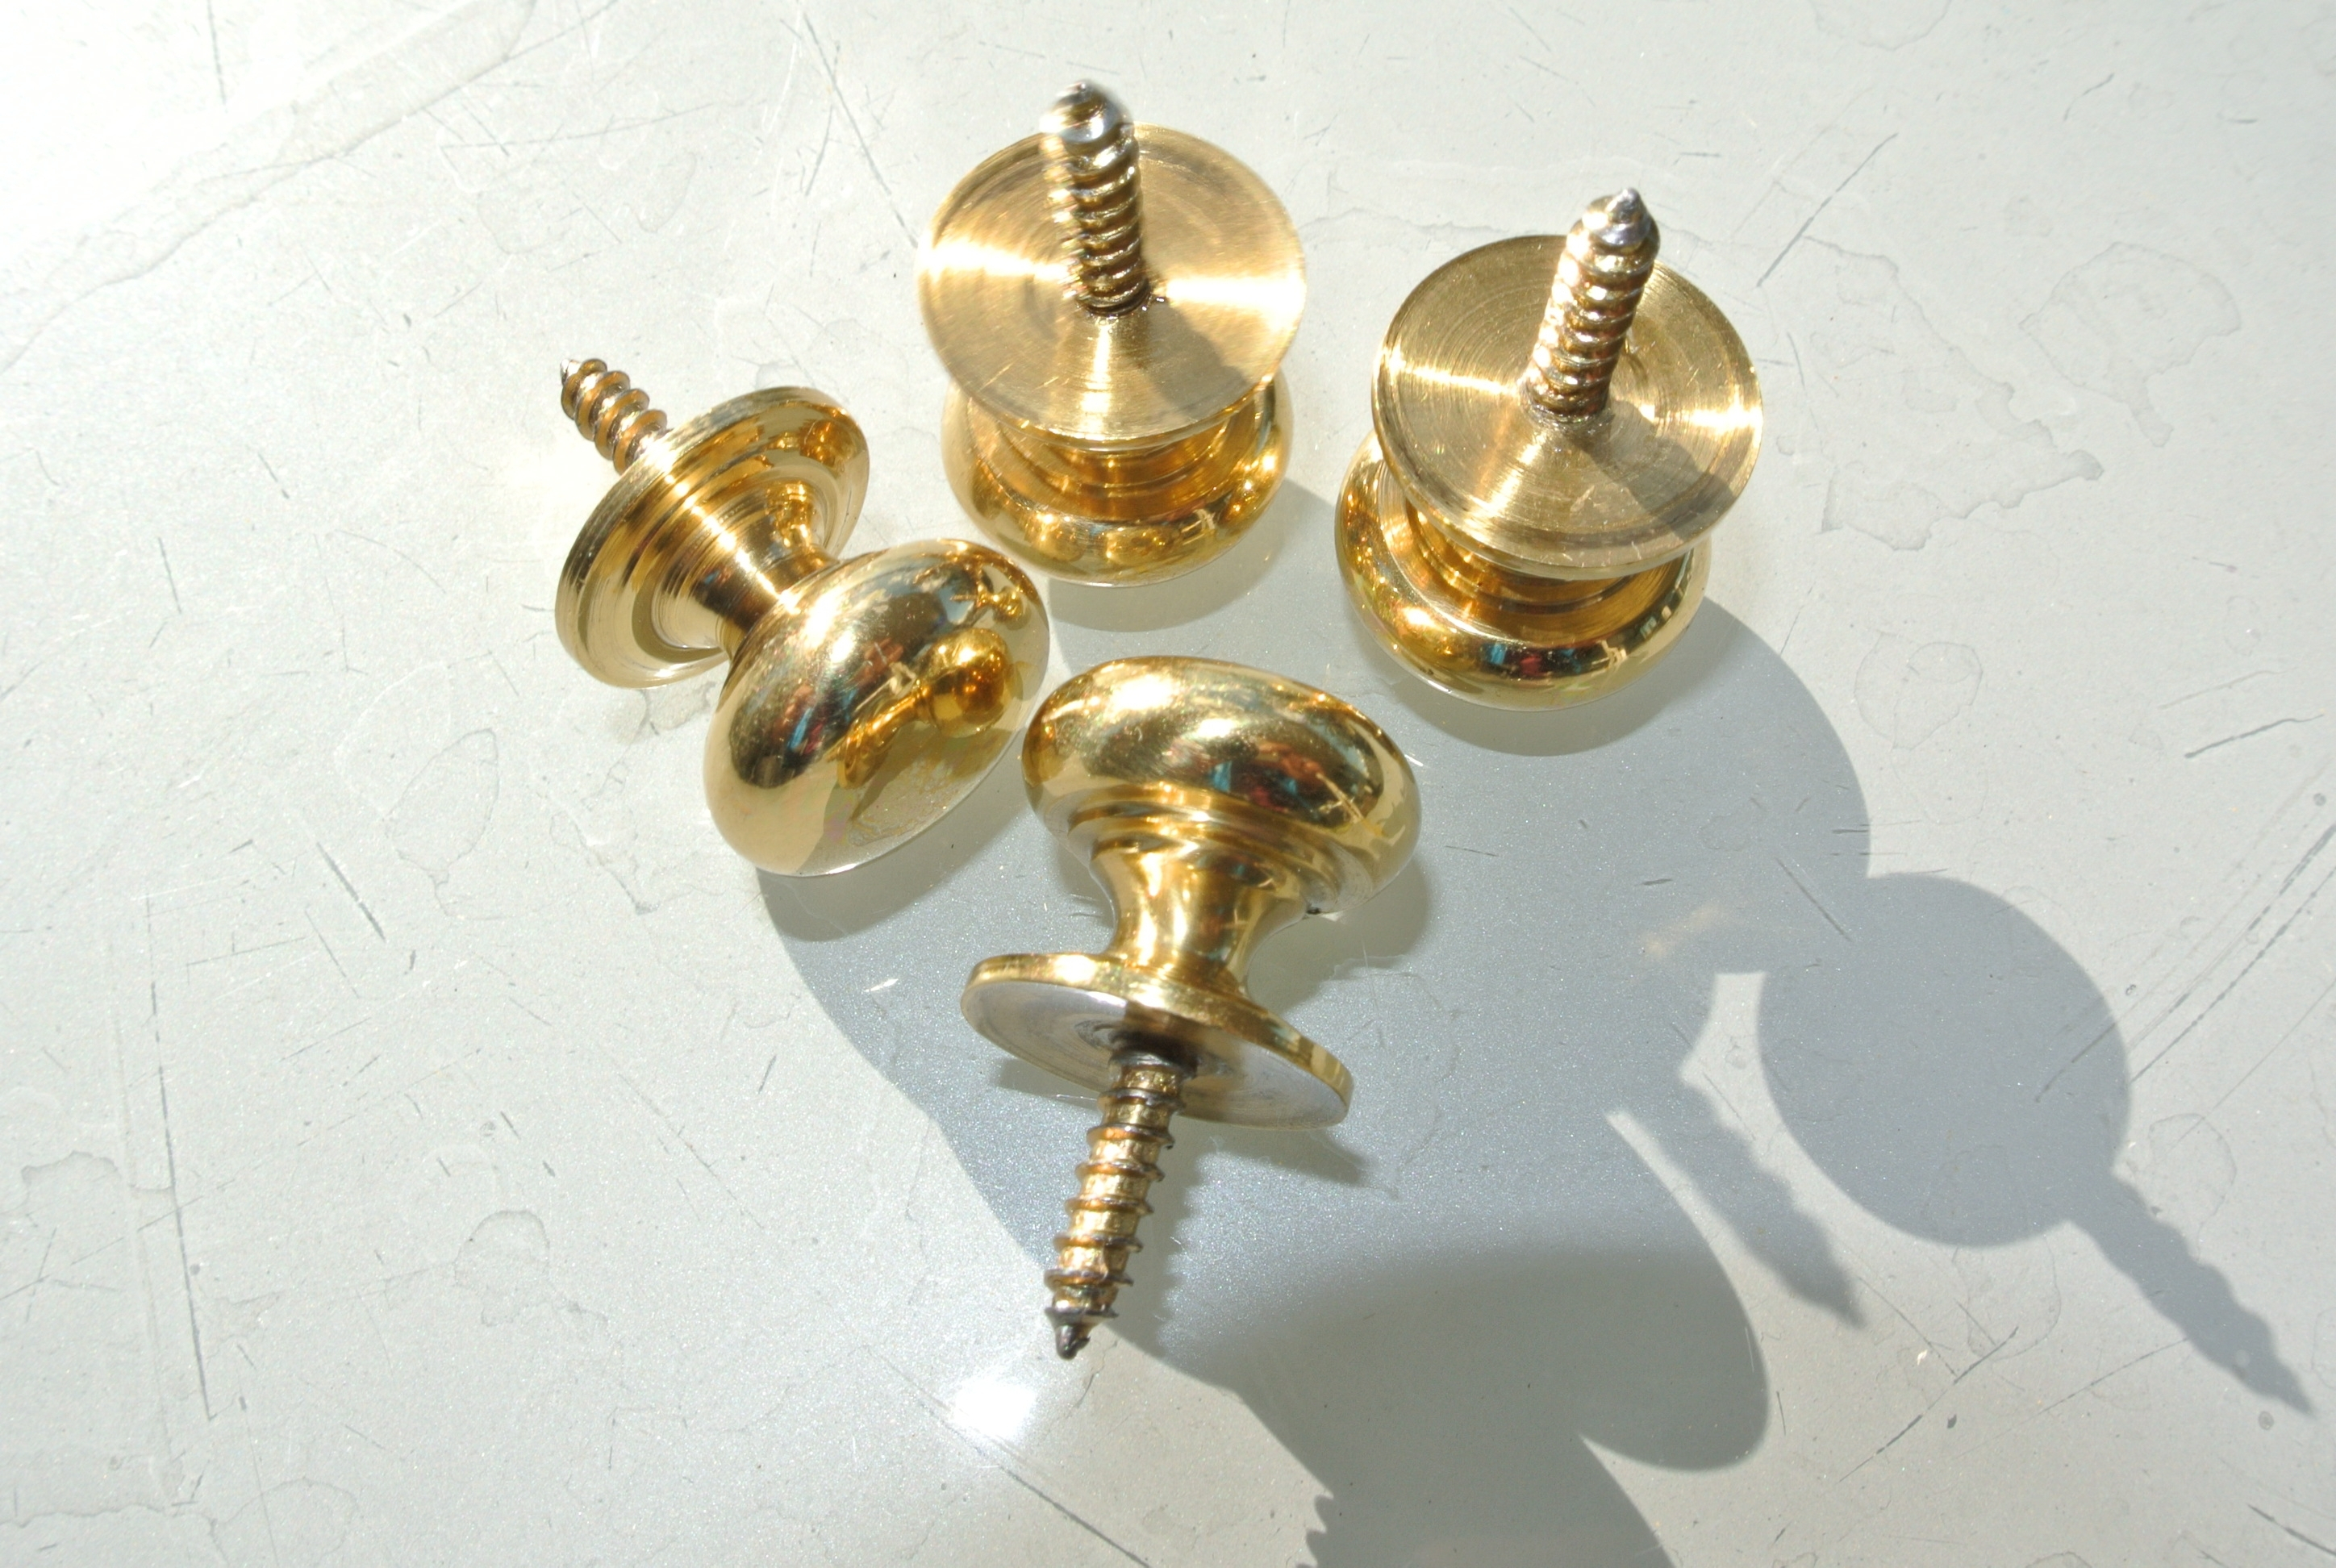 4 Very Small Screw Knobs Pulls Handles Antique Solid Heavy Brass regarding dimensions 2896 X 1944